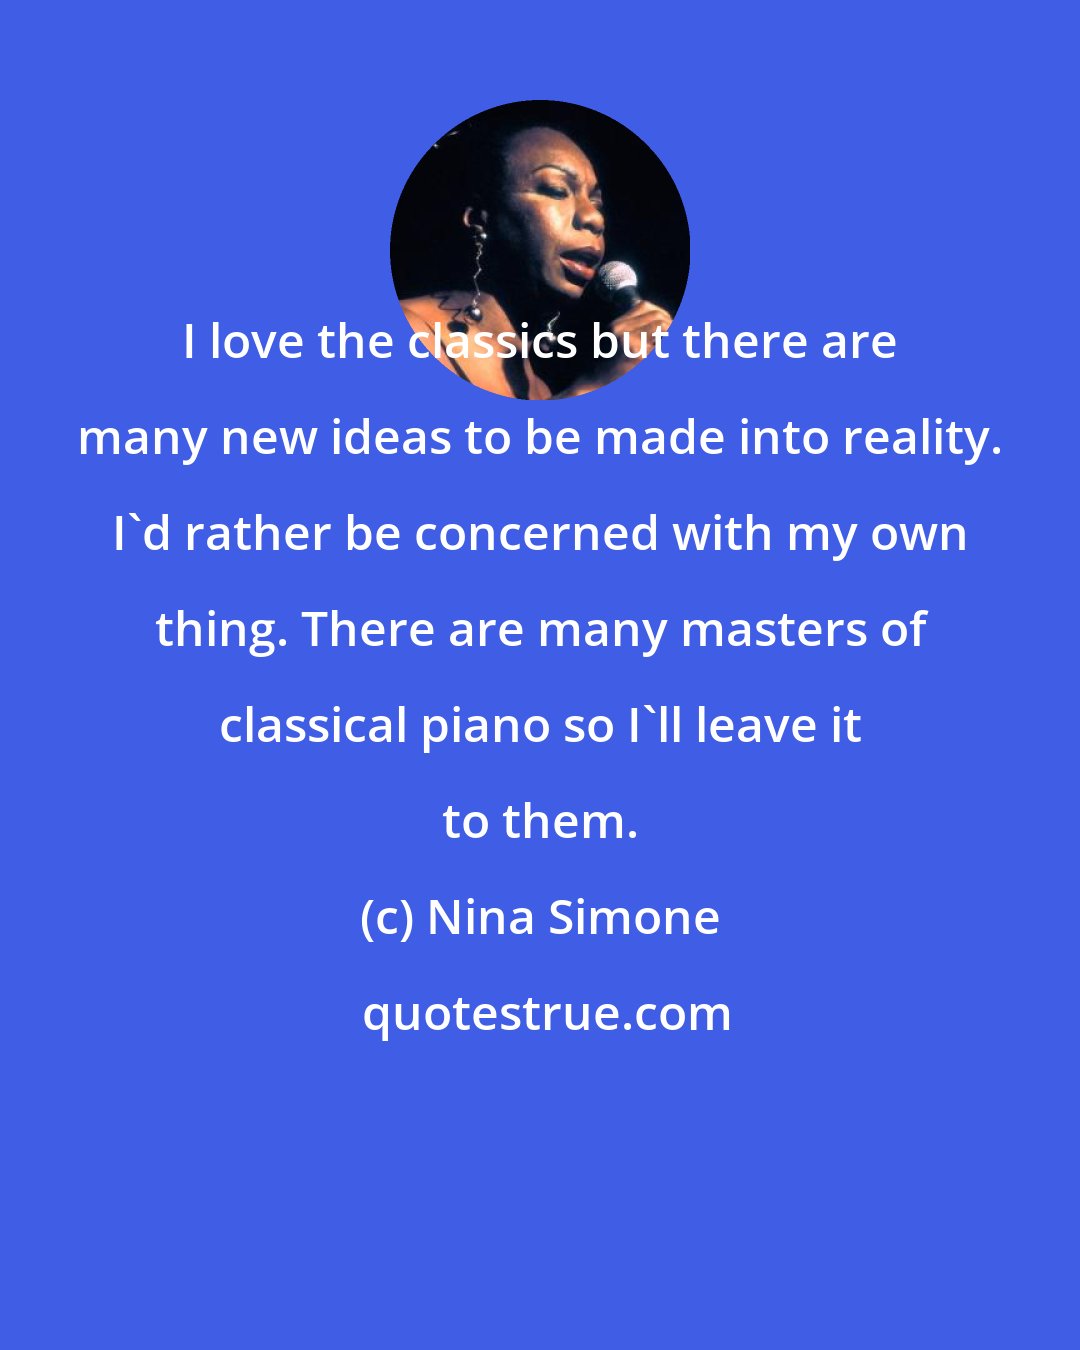 Nina Simone: I love the classics but there are many new ideas to be made into reality. I'd rather be concerned with my own thing. There are many masters of classical piano so I'll leave it to them.